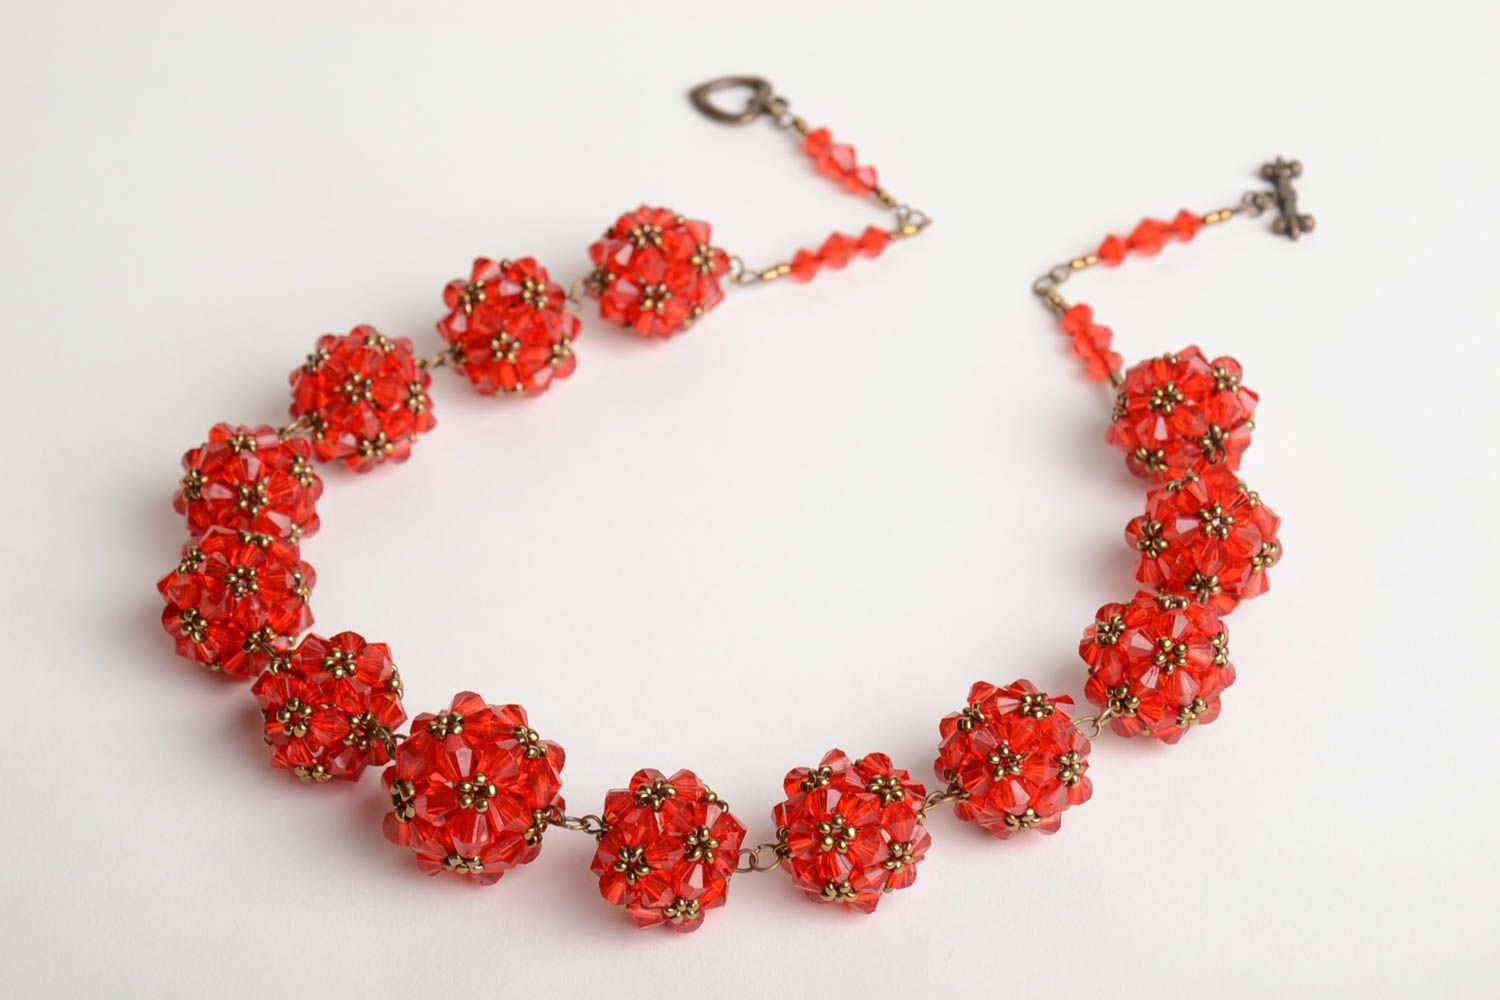 Handmade designer crocheted beaded necklace in bright red color palette photo 5